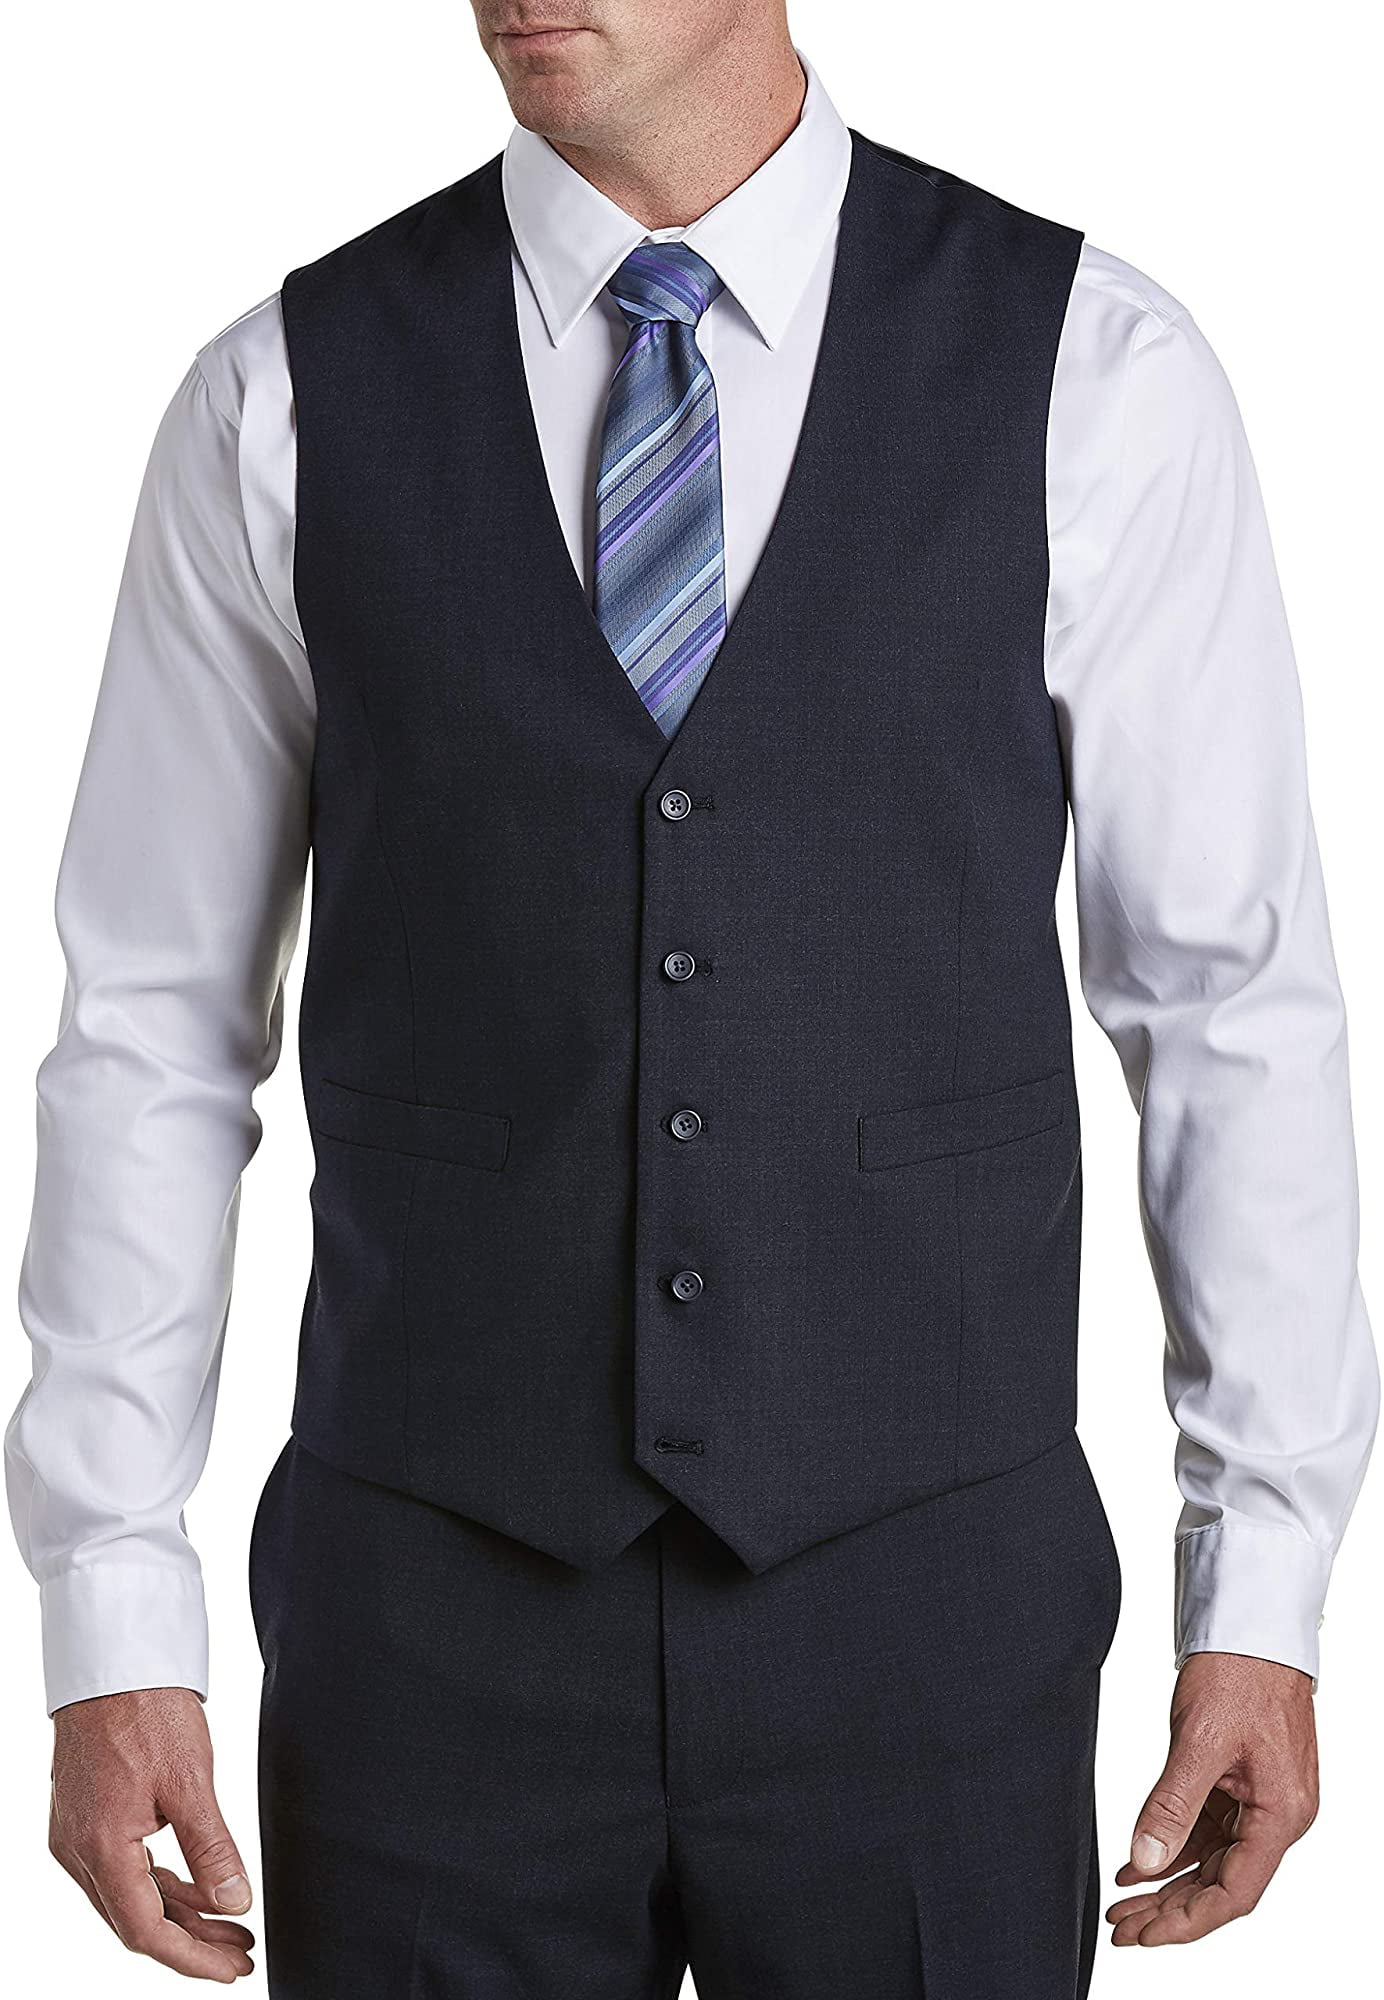 Gold Series by DXL Big and Tall Suit Vest Regular | Walmart Canada